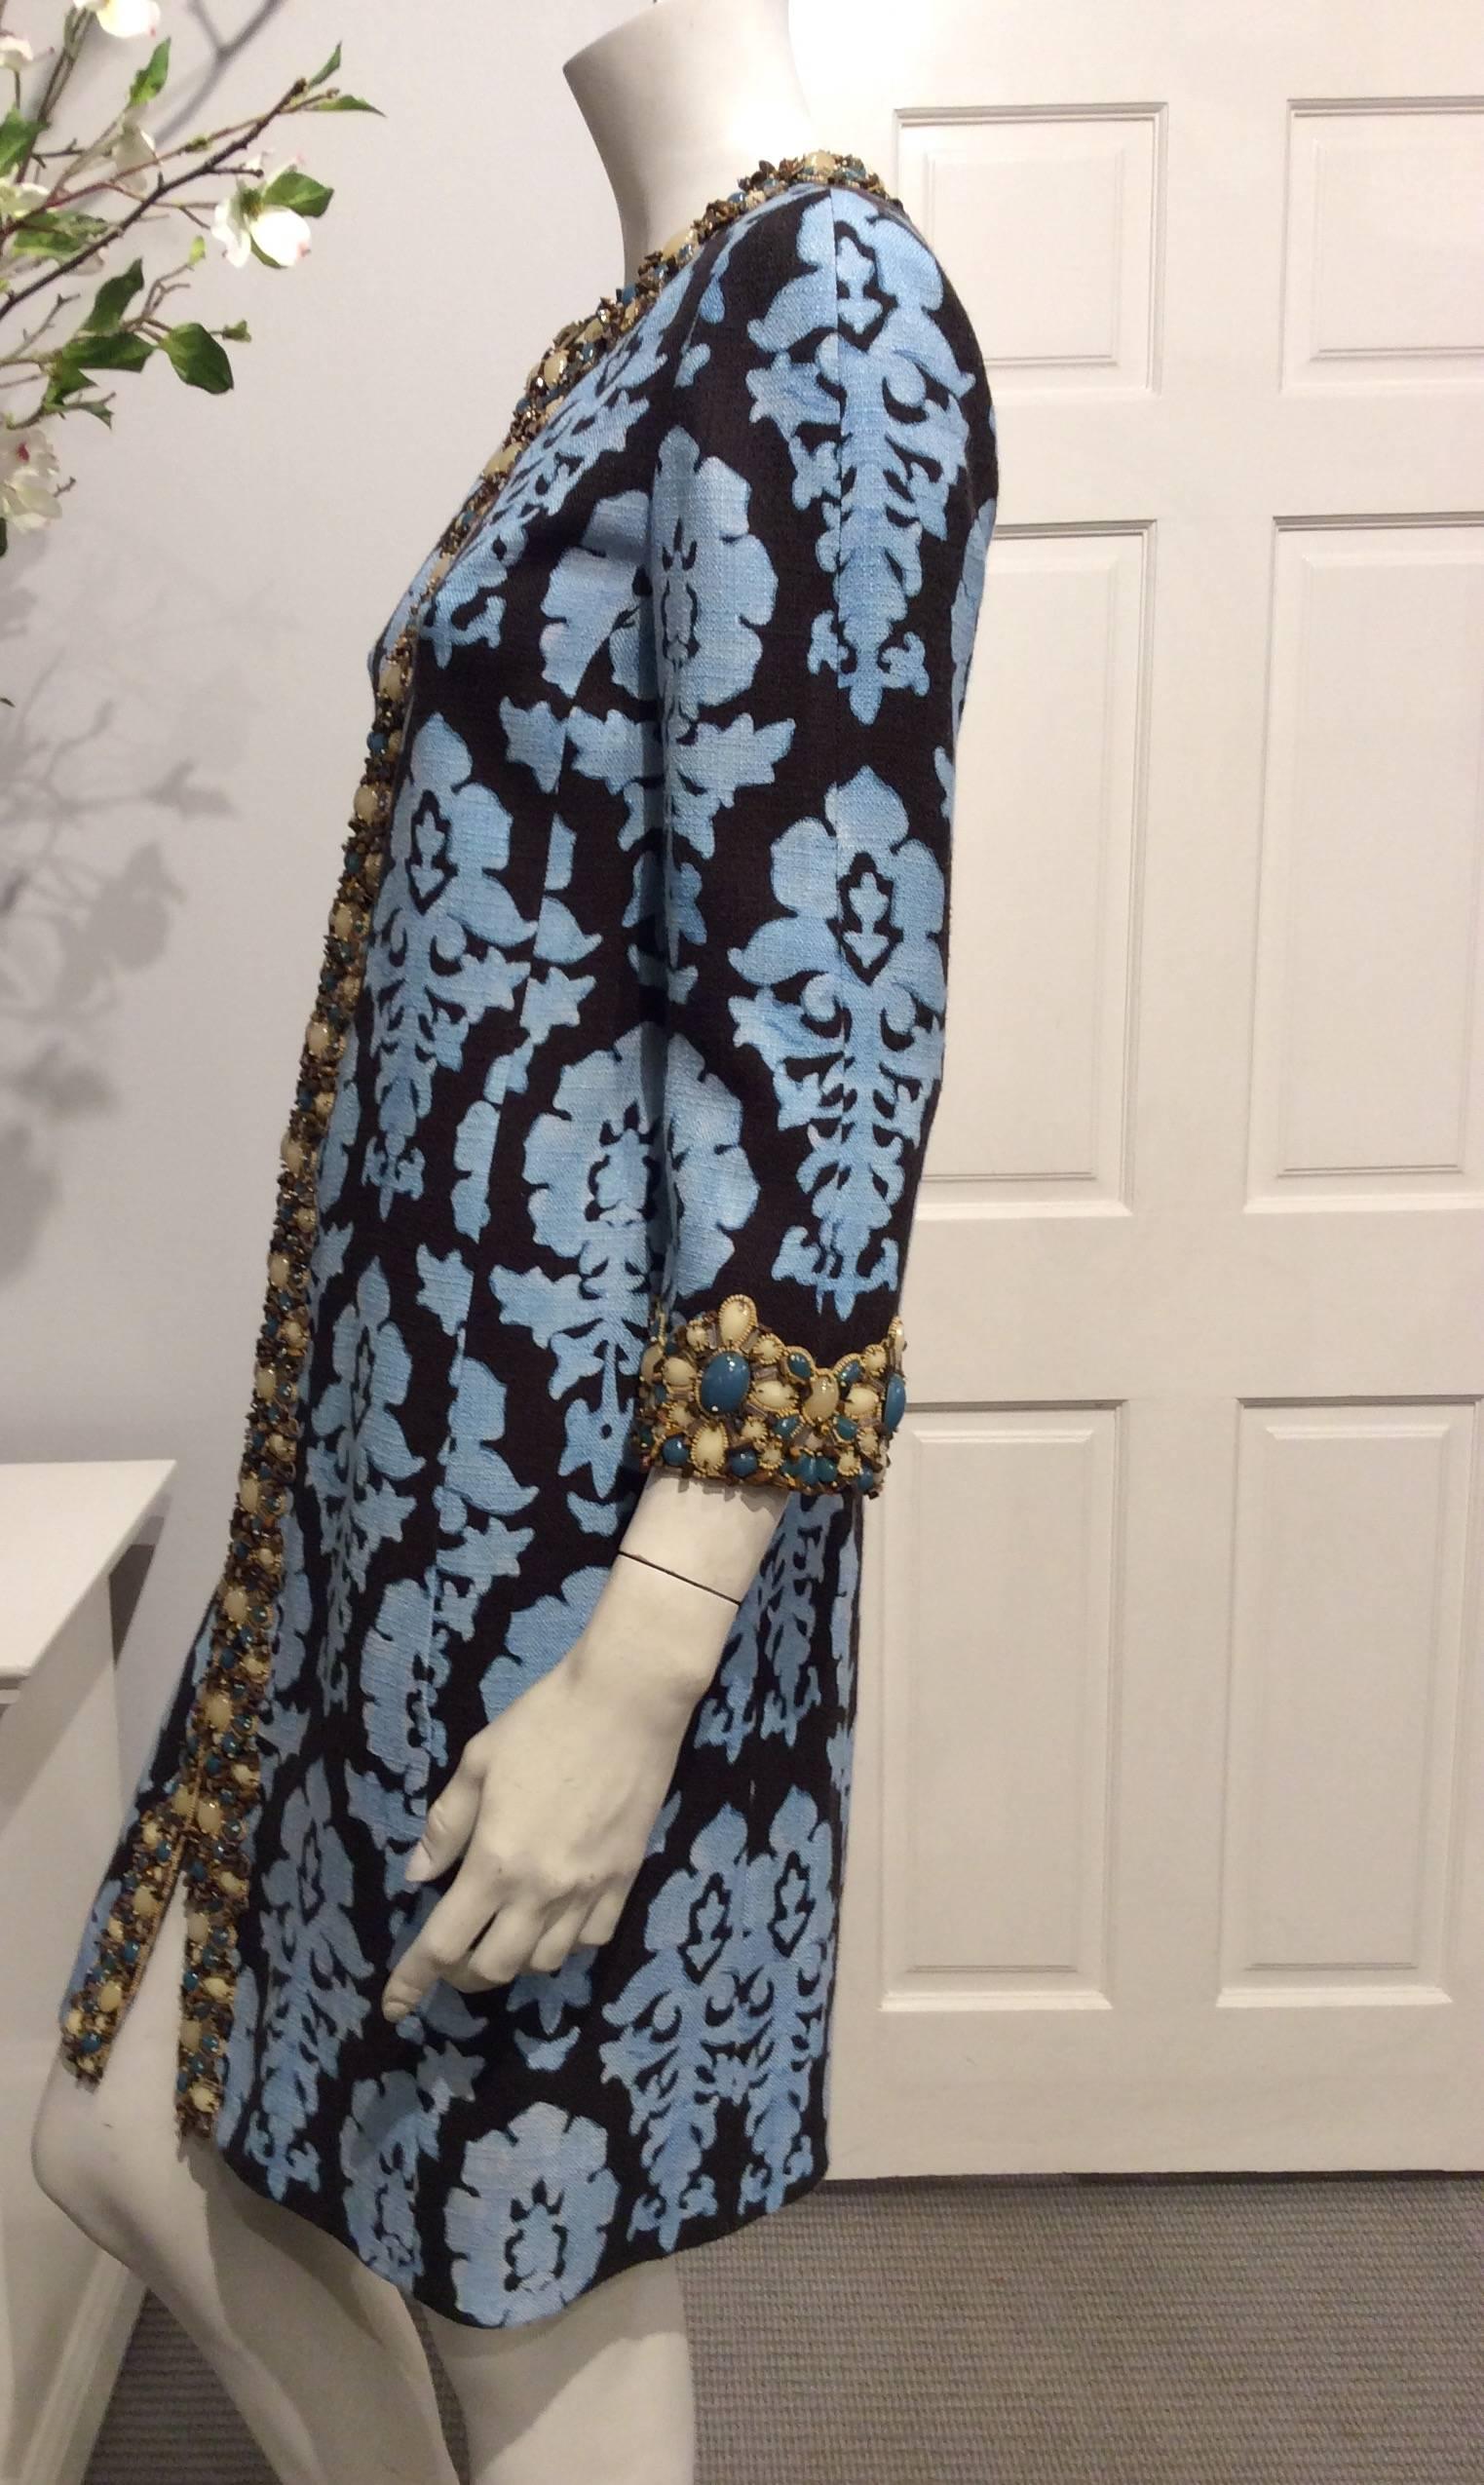 Andrew GN coat in light blue oversized paisley print on a dark brown background. The beaded trim is made out of different kind of stones in shades of brown, taupe and teal blue. It closes with 10 pewter colored hooks. The sleeves are 3/4 length.